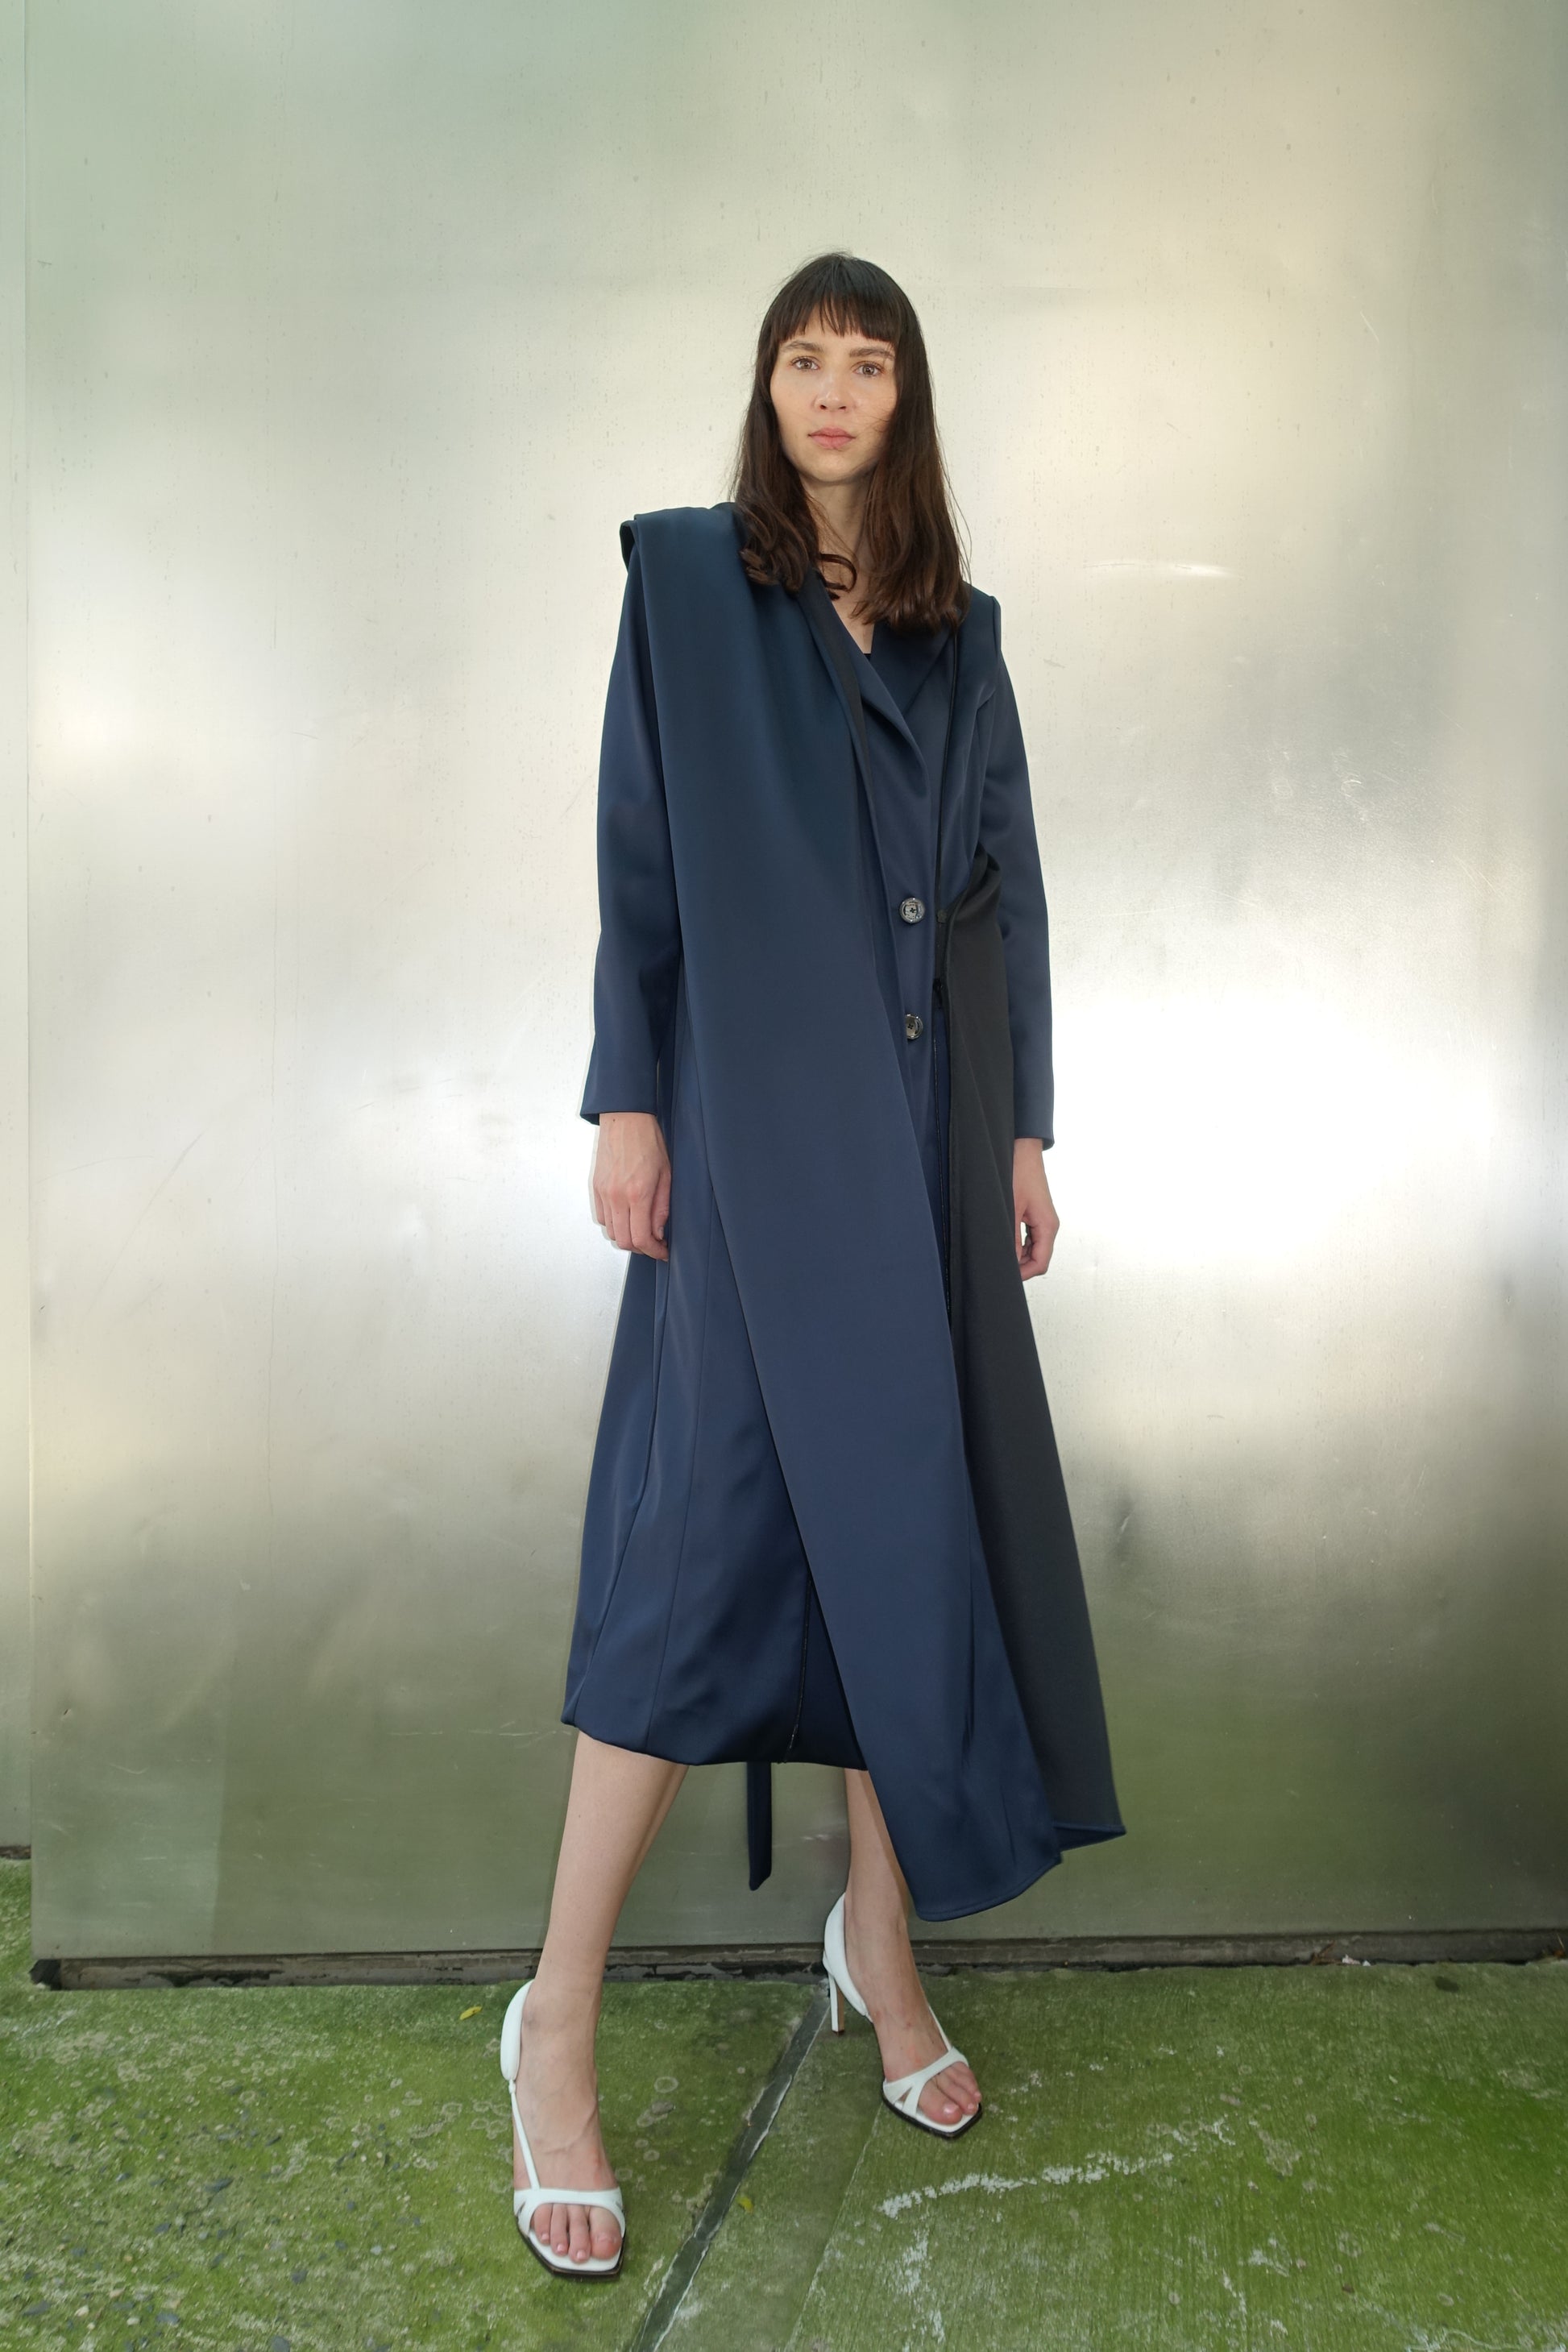 Woman wearing navy navy stretch satin coat with transformable zippers and self tie belt with draped detail on the right side of her body